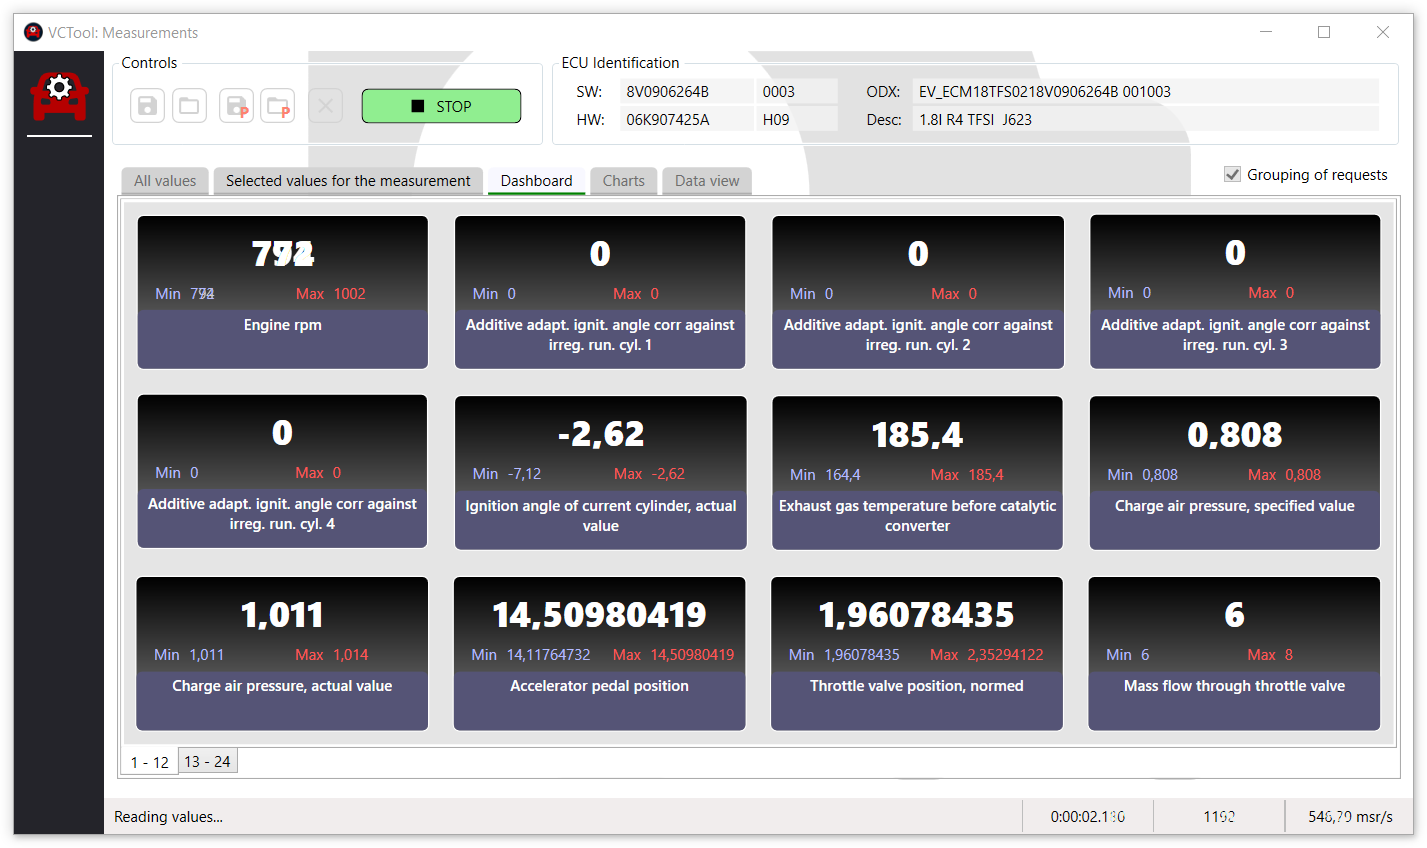 VCTool Measurements - VCTool Dashboard